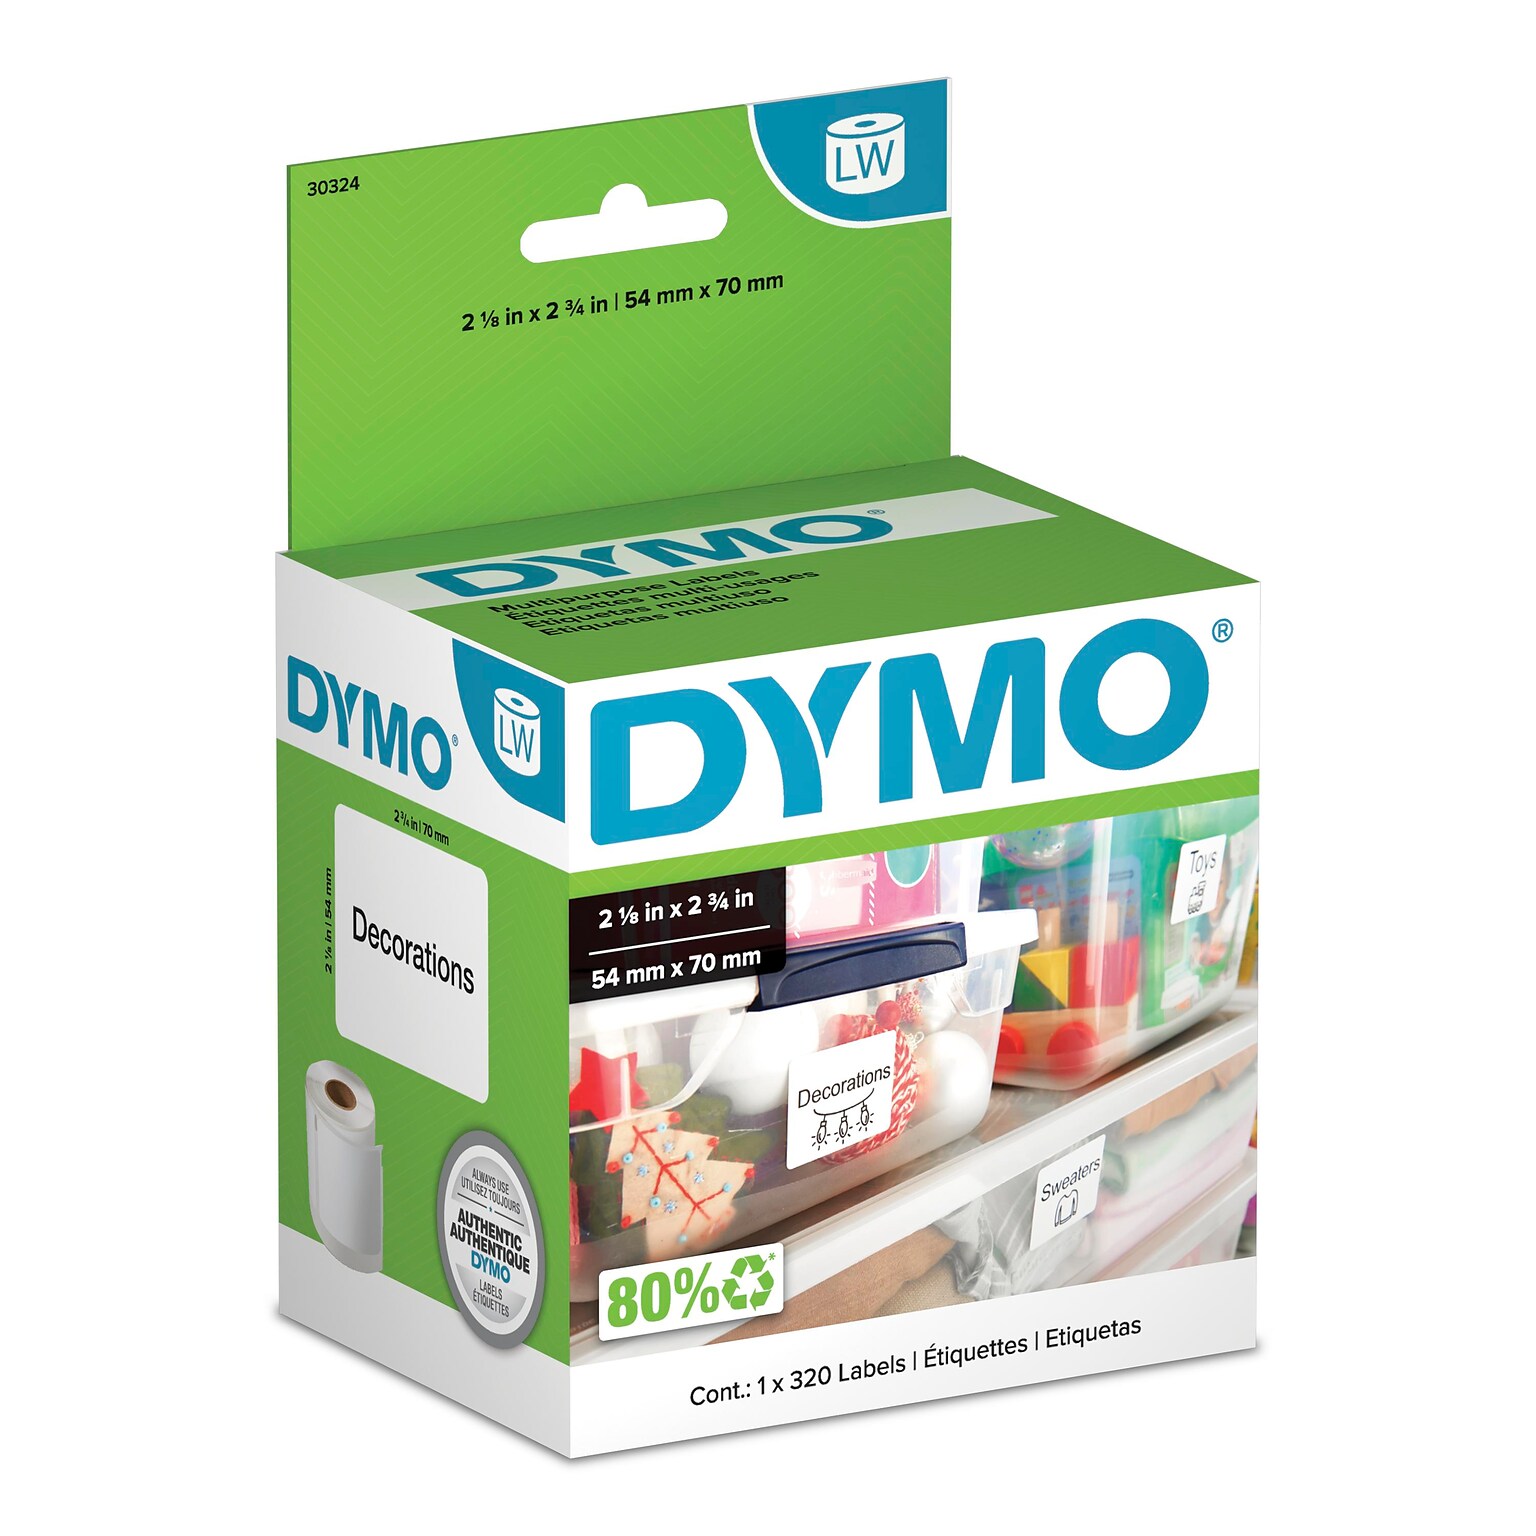 DYMO LabelWriter 30324 Large Multi-Purpose Labels, 2-3/4 x 2-1/8, Black on White, 320 Labels/Roll (30324)